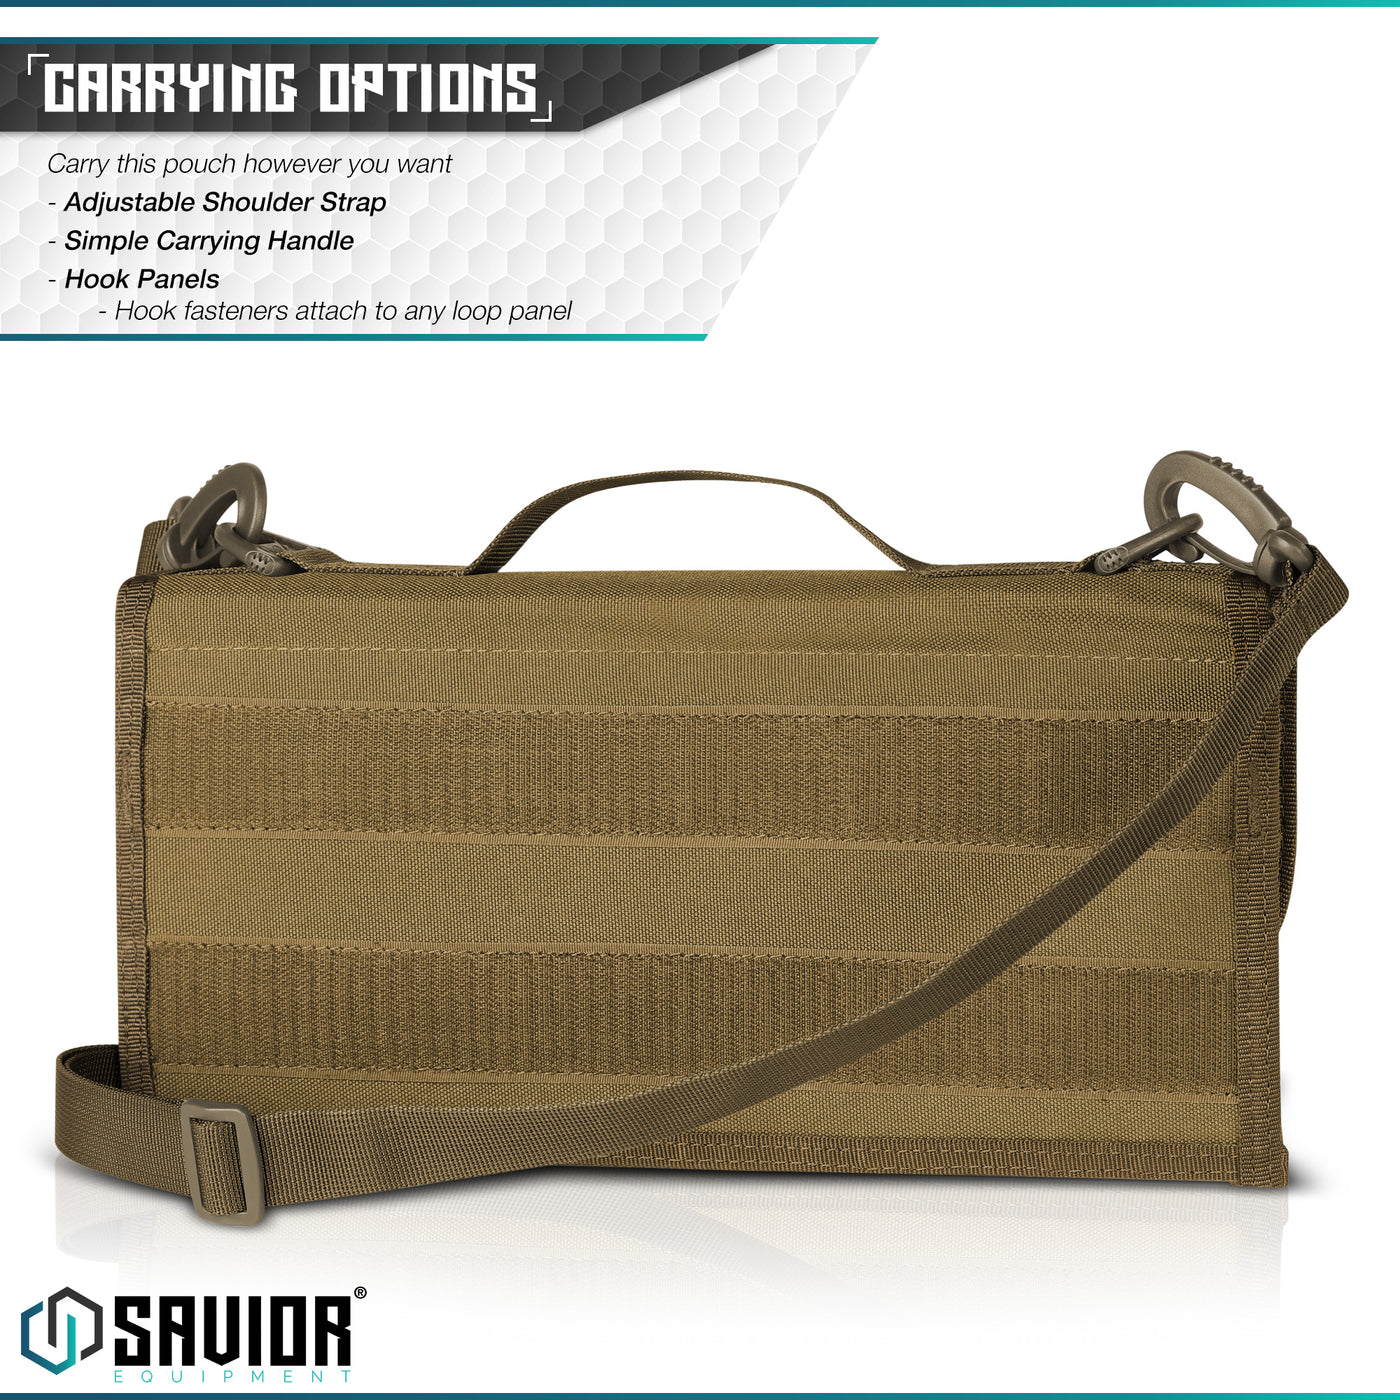 Multiple Carrying Options - You can carry this mag pouch with the adjustable shoulder strap on any D-Rings on the pouch or hook fasteners to attach to any loop panel.